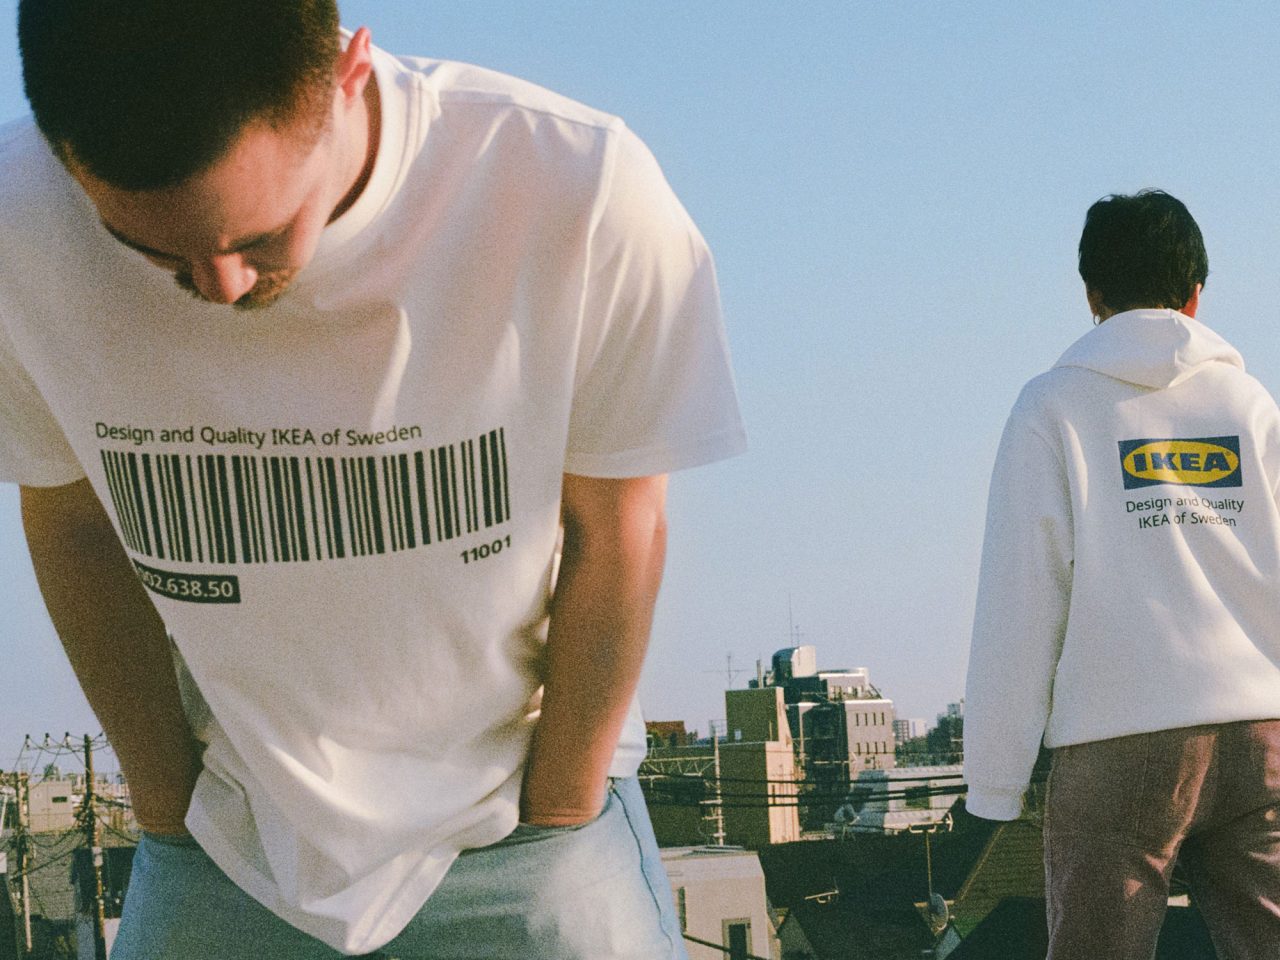 Two people on a rooftop, one in a white T-shirt with a large black barcode, the other in a white hoodie with IKEA text.